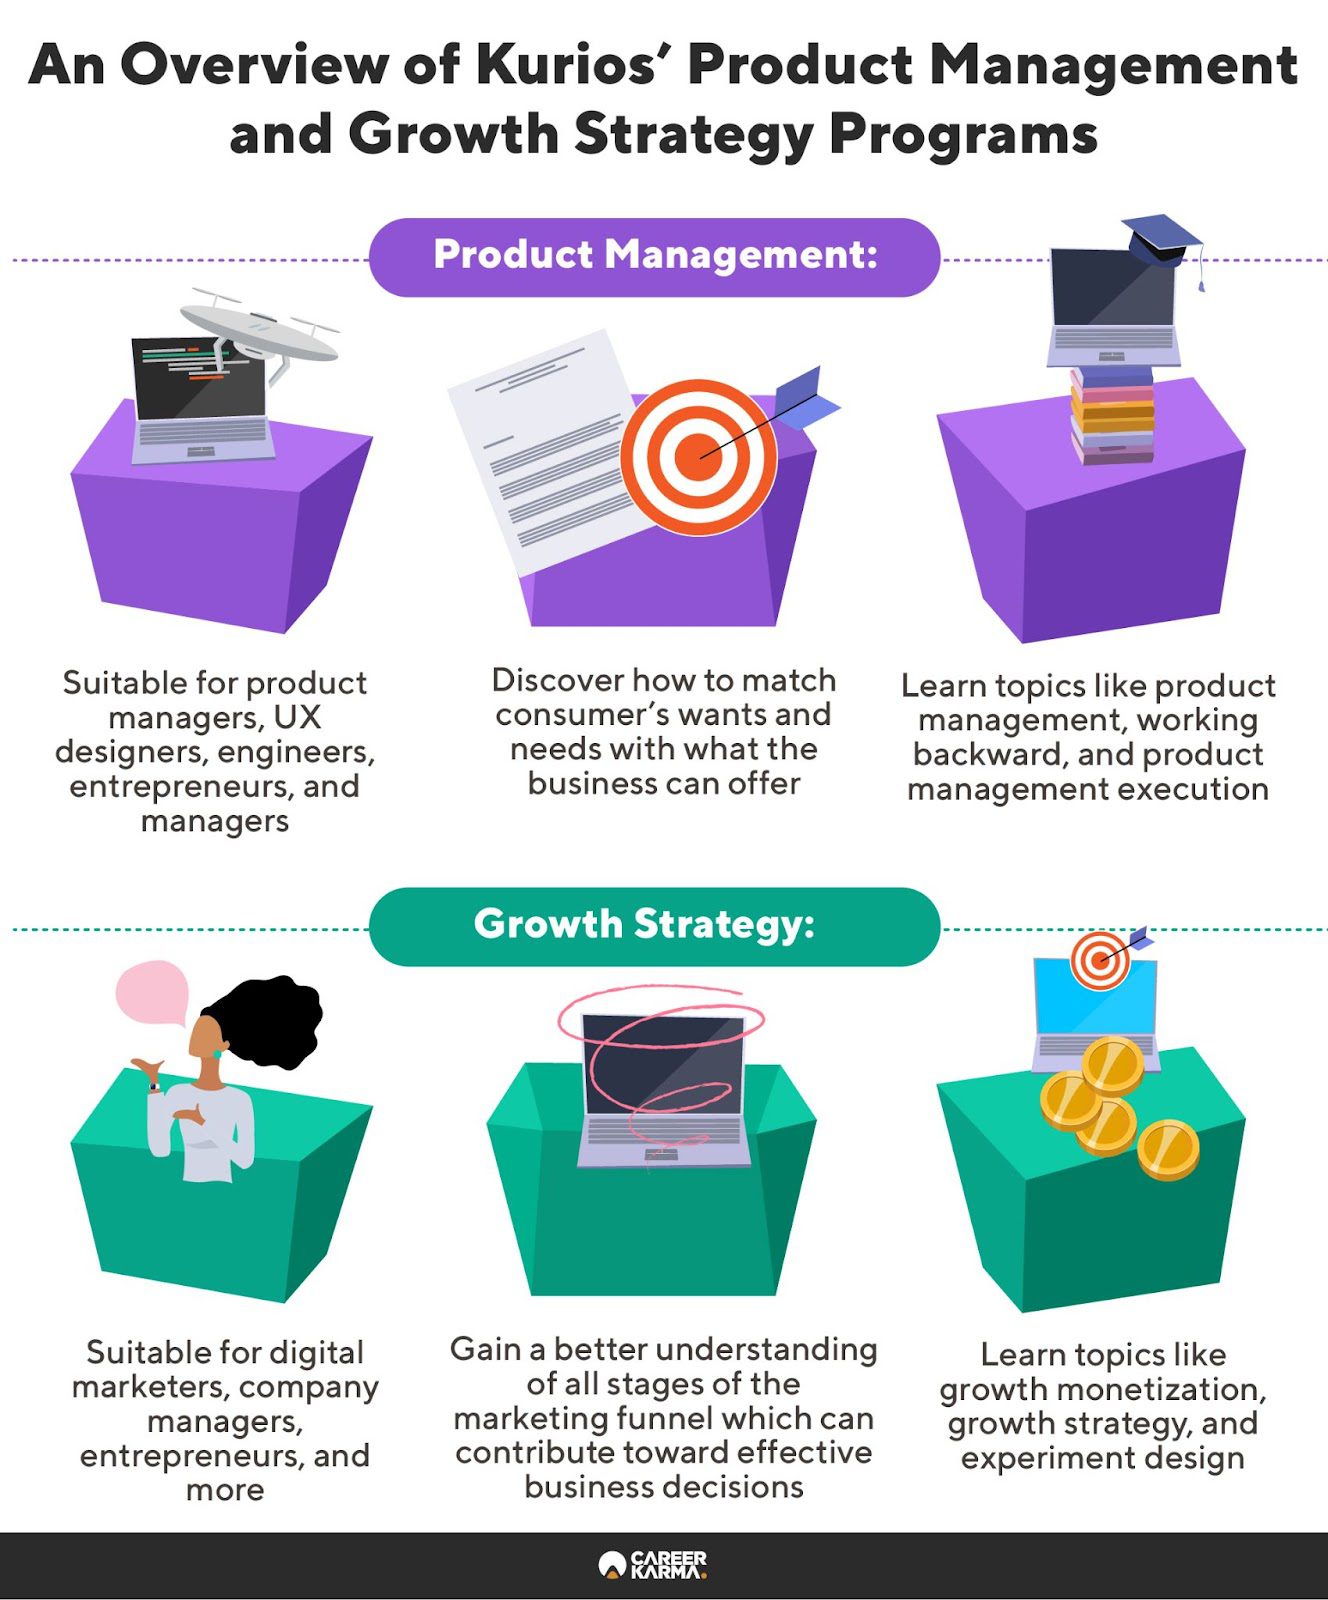 Infographic showing an overview of Kurios’ Product Management and Growth Strategy programs